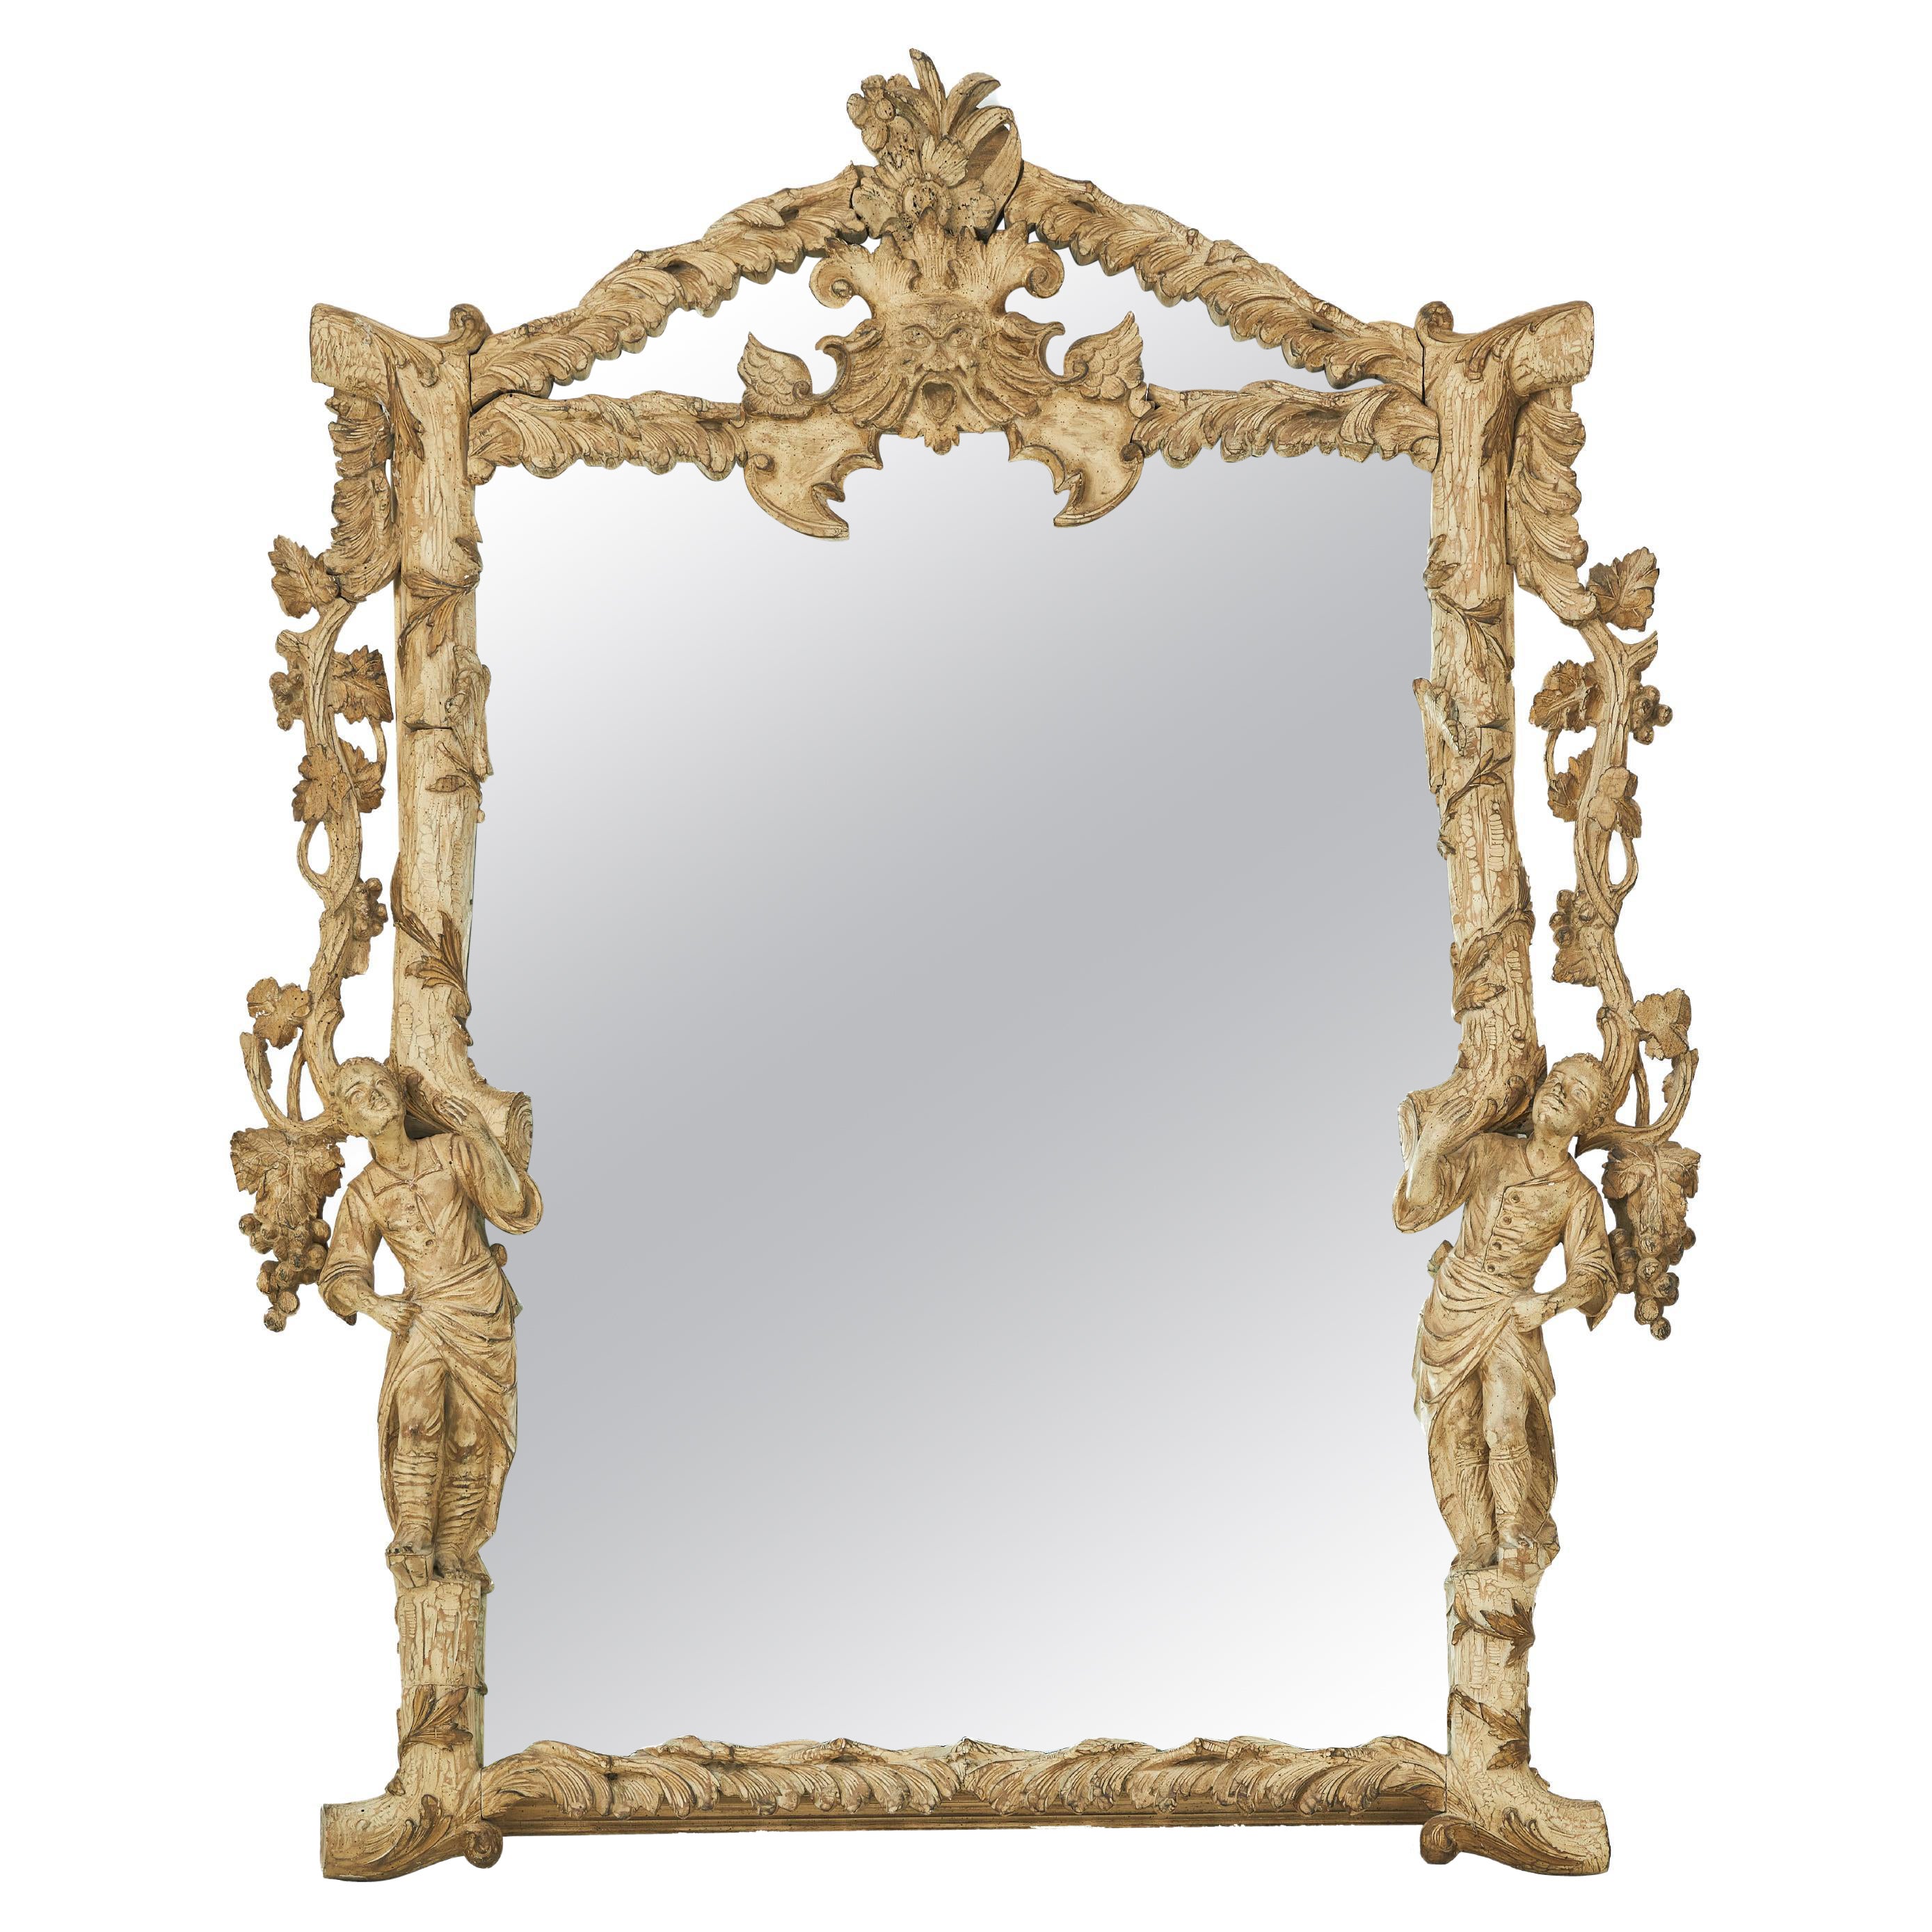 Elegant Faux Bois Mirror with Figures by William Haines